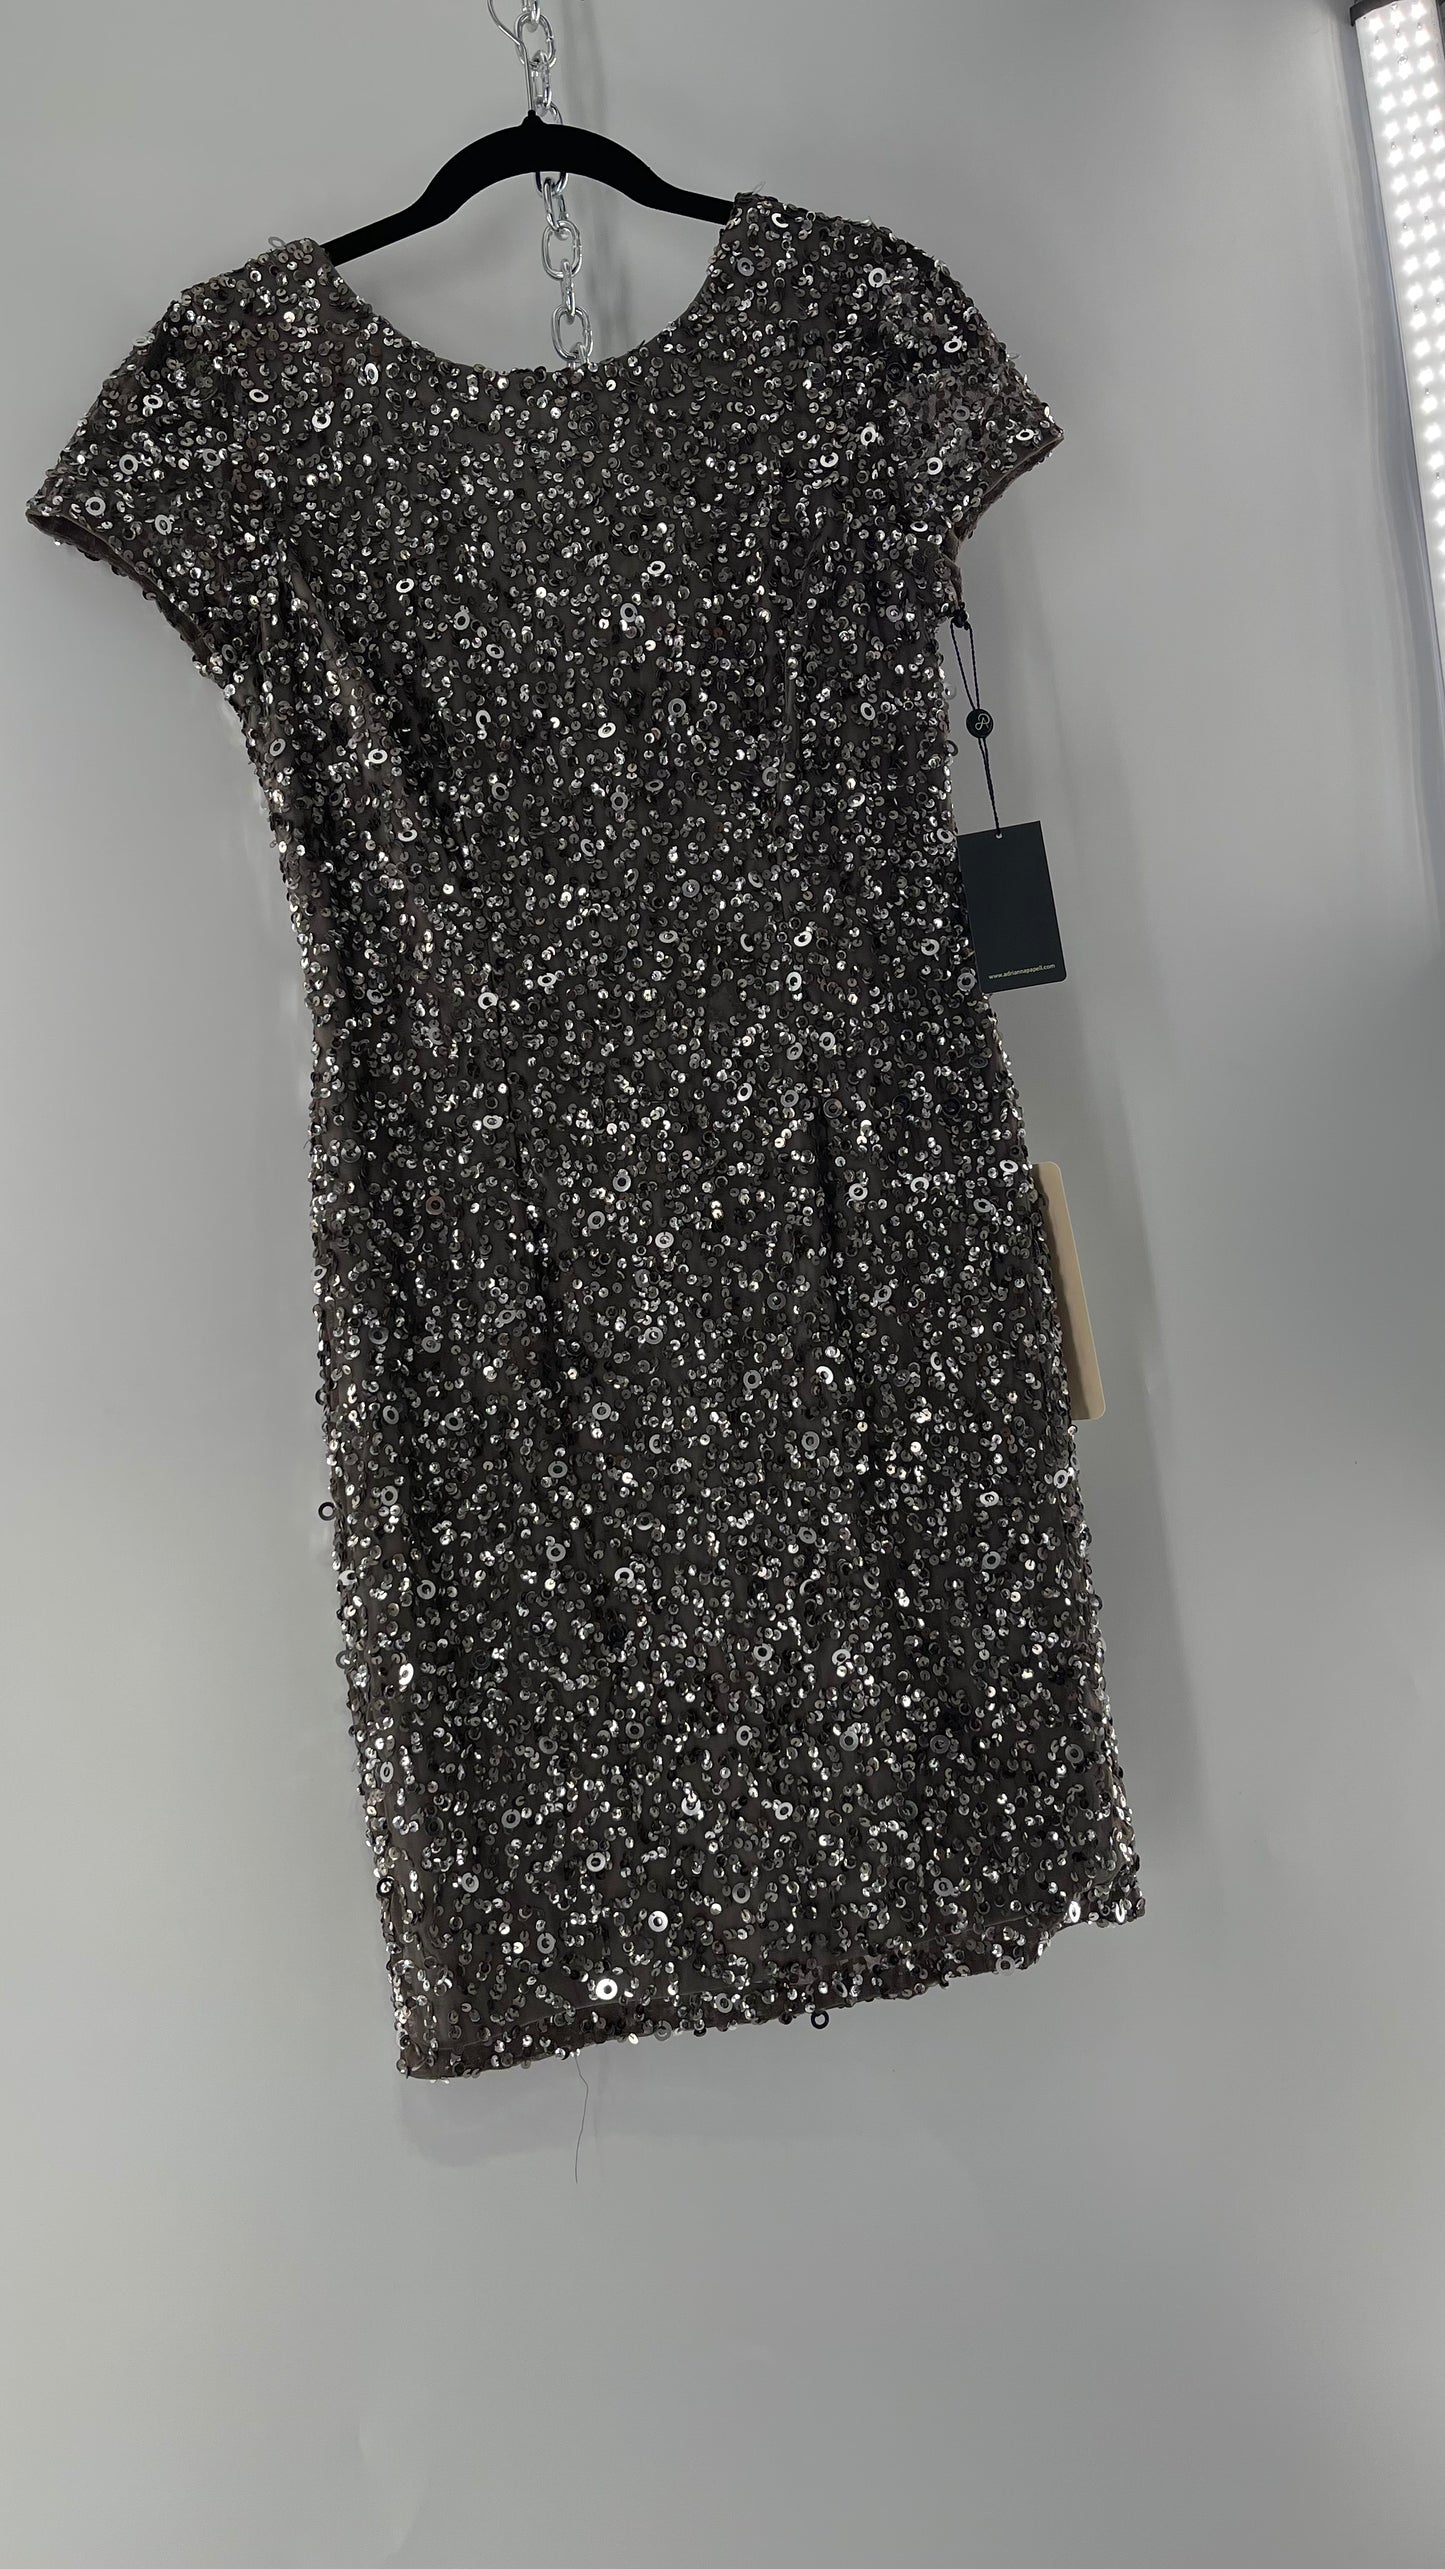 Adriana Papell Grey/Silver Short Sleeve Mini Dress Covered in Beads and Sequins (6)